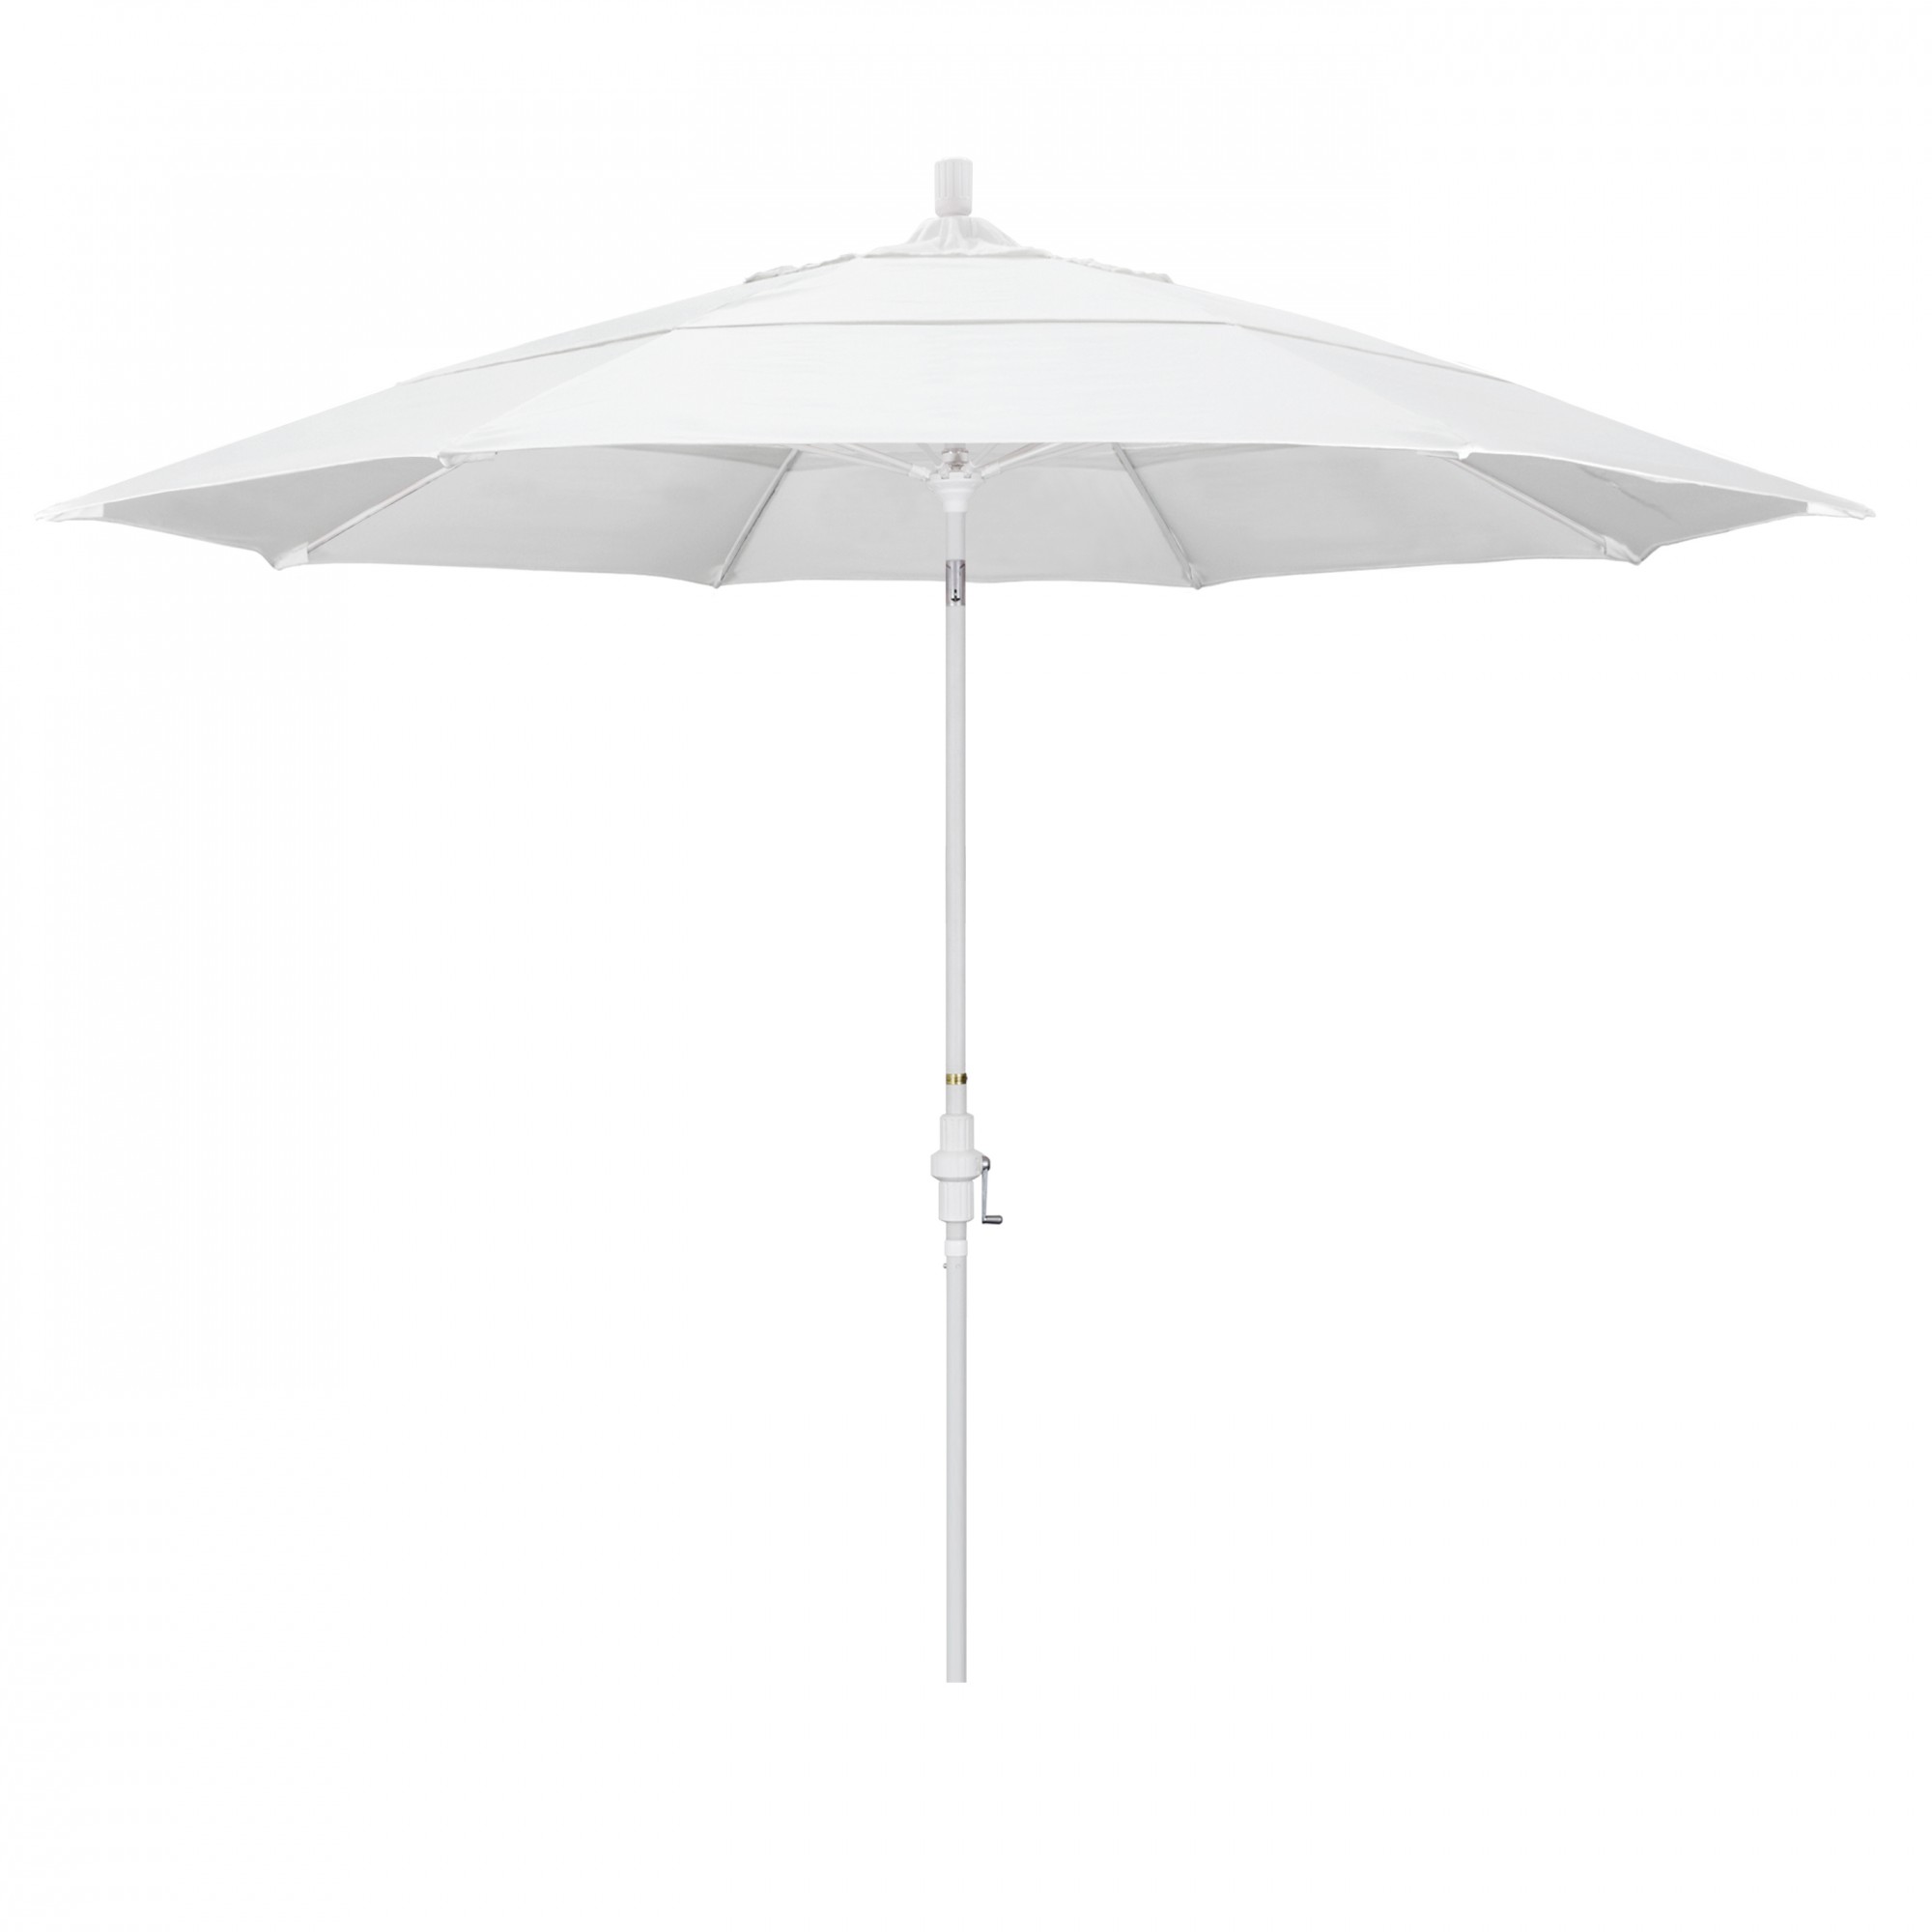 Outdoor Living and Style 11ft Outdoor Sun Master Series Patio Umbrella With Crank Lift and Collar-Tilt System, White